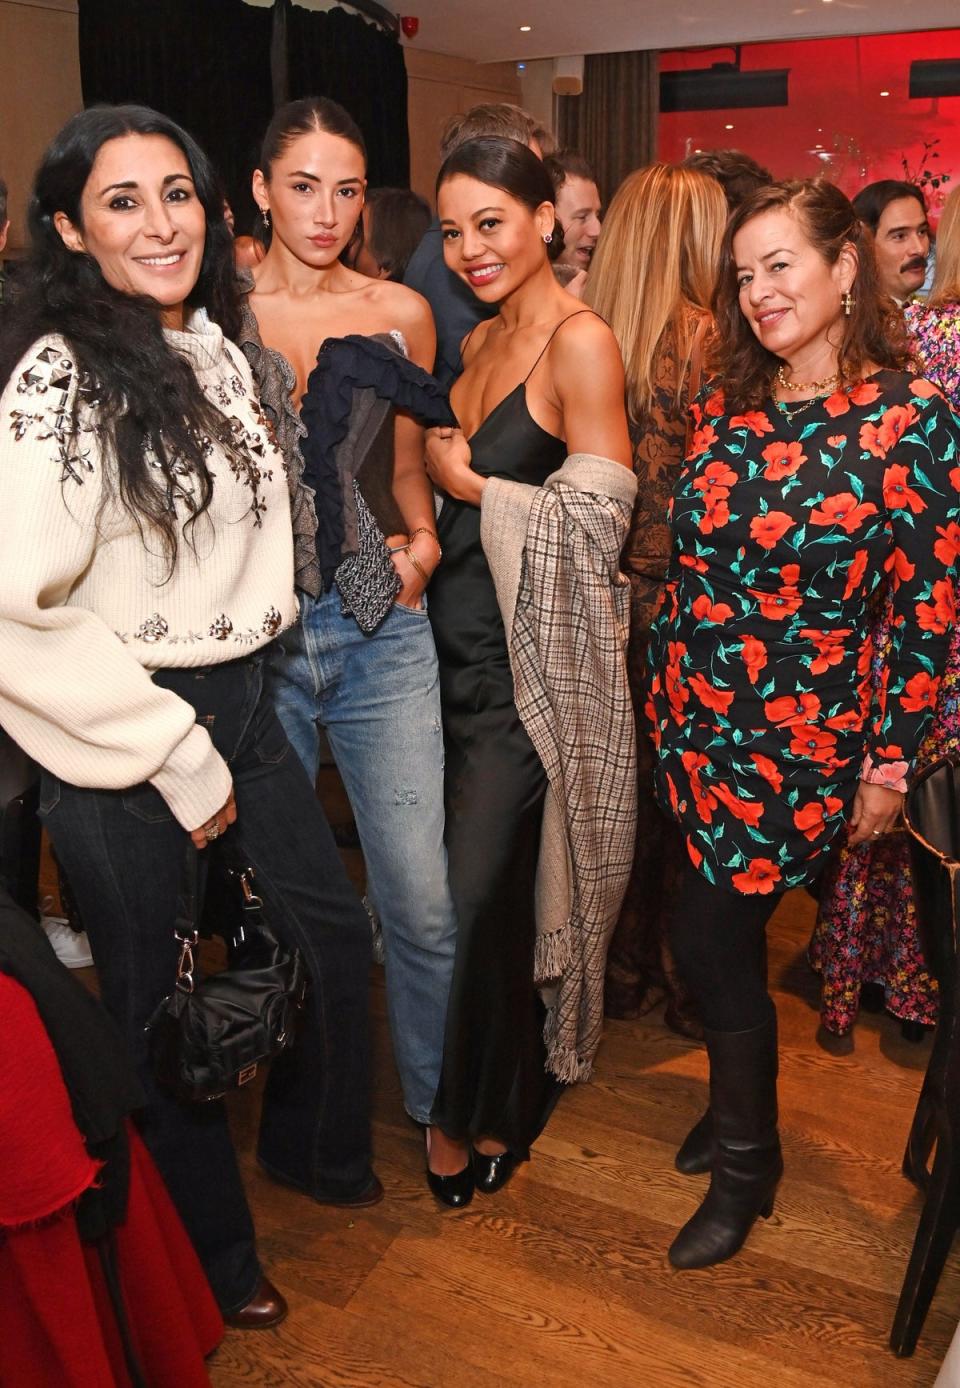 (L to R) Serena Rees, Cora Corre, Emma Weymouth, Marchioness of Bath, and Jade Jagger (Dave Benett)